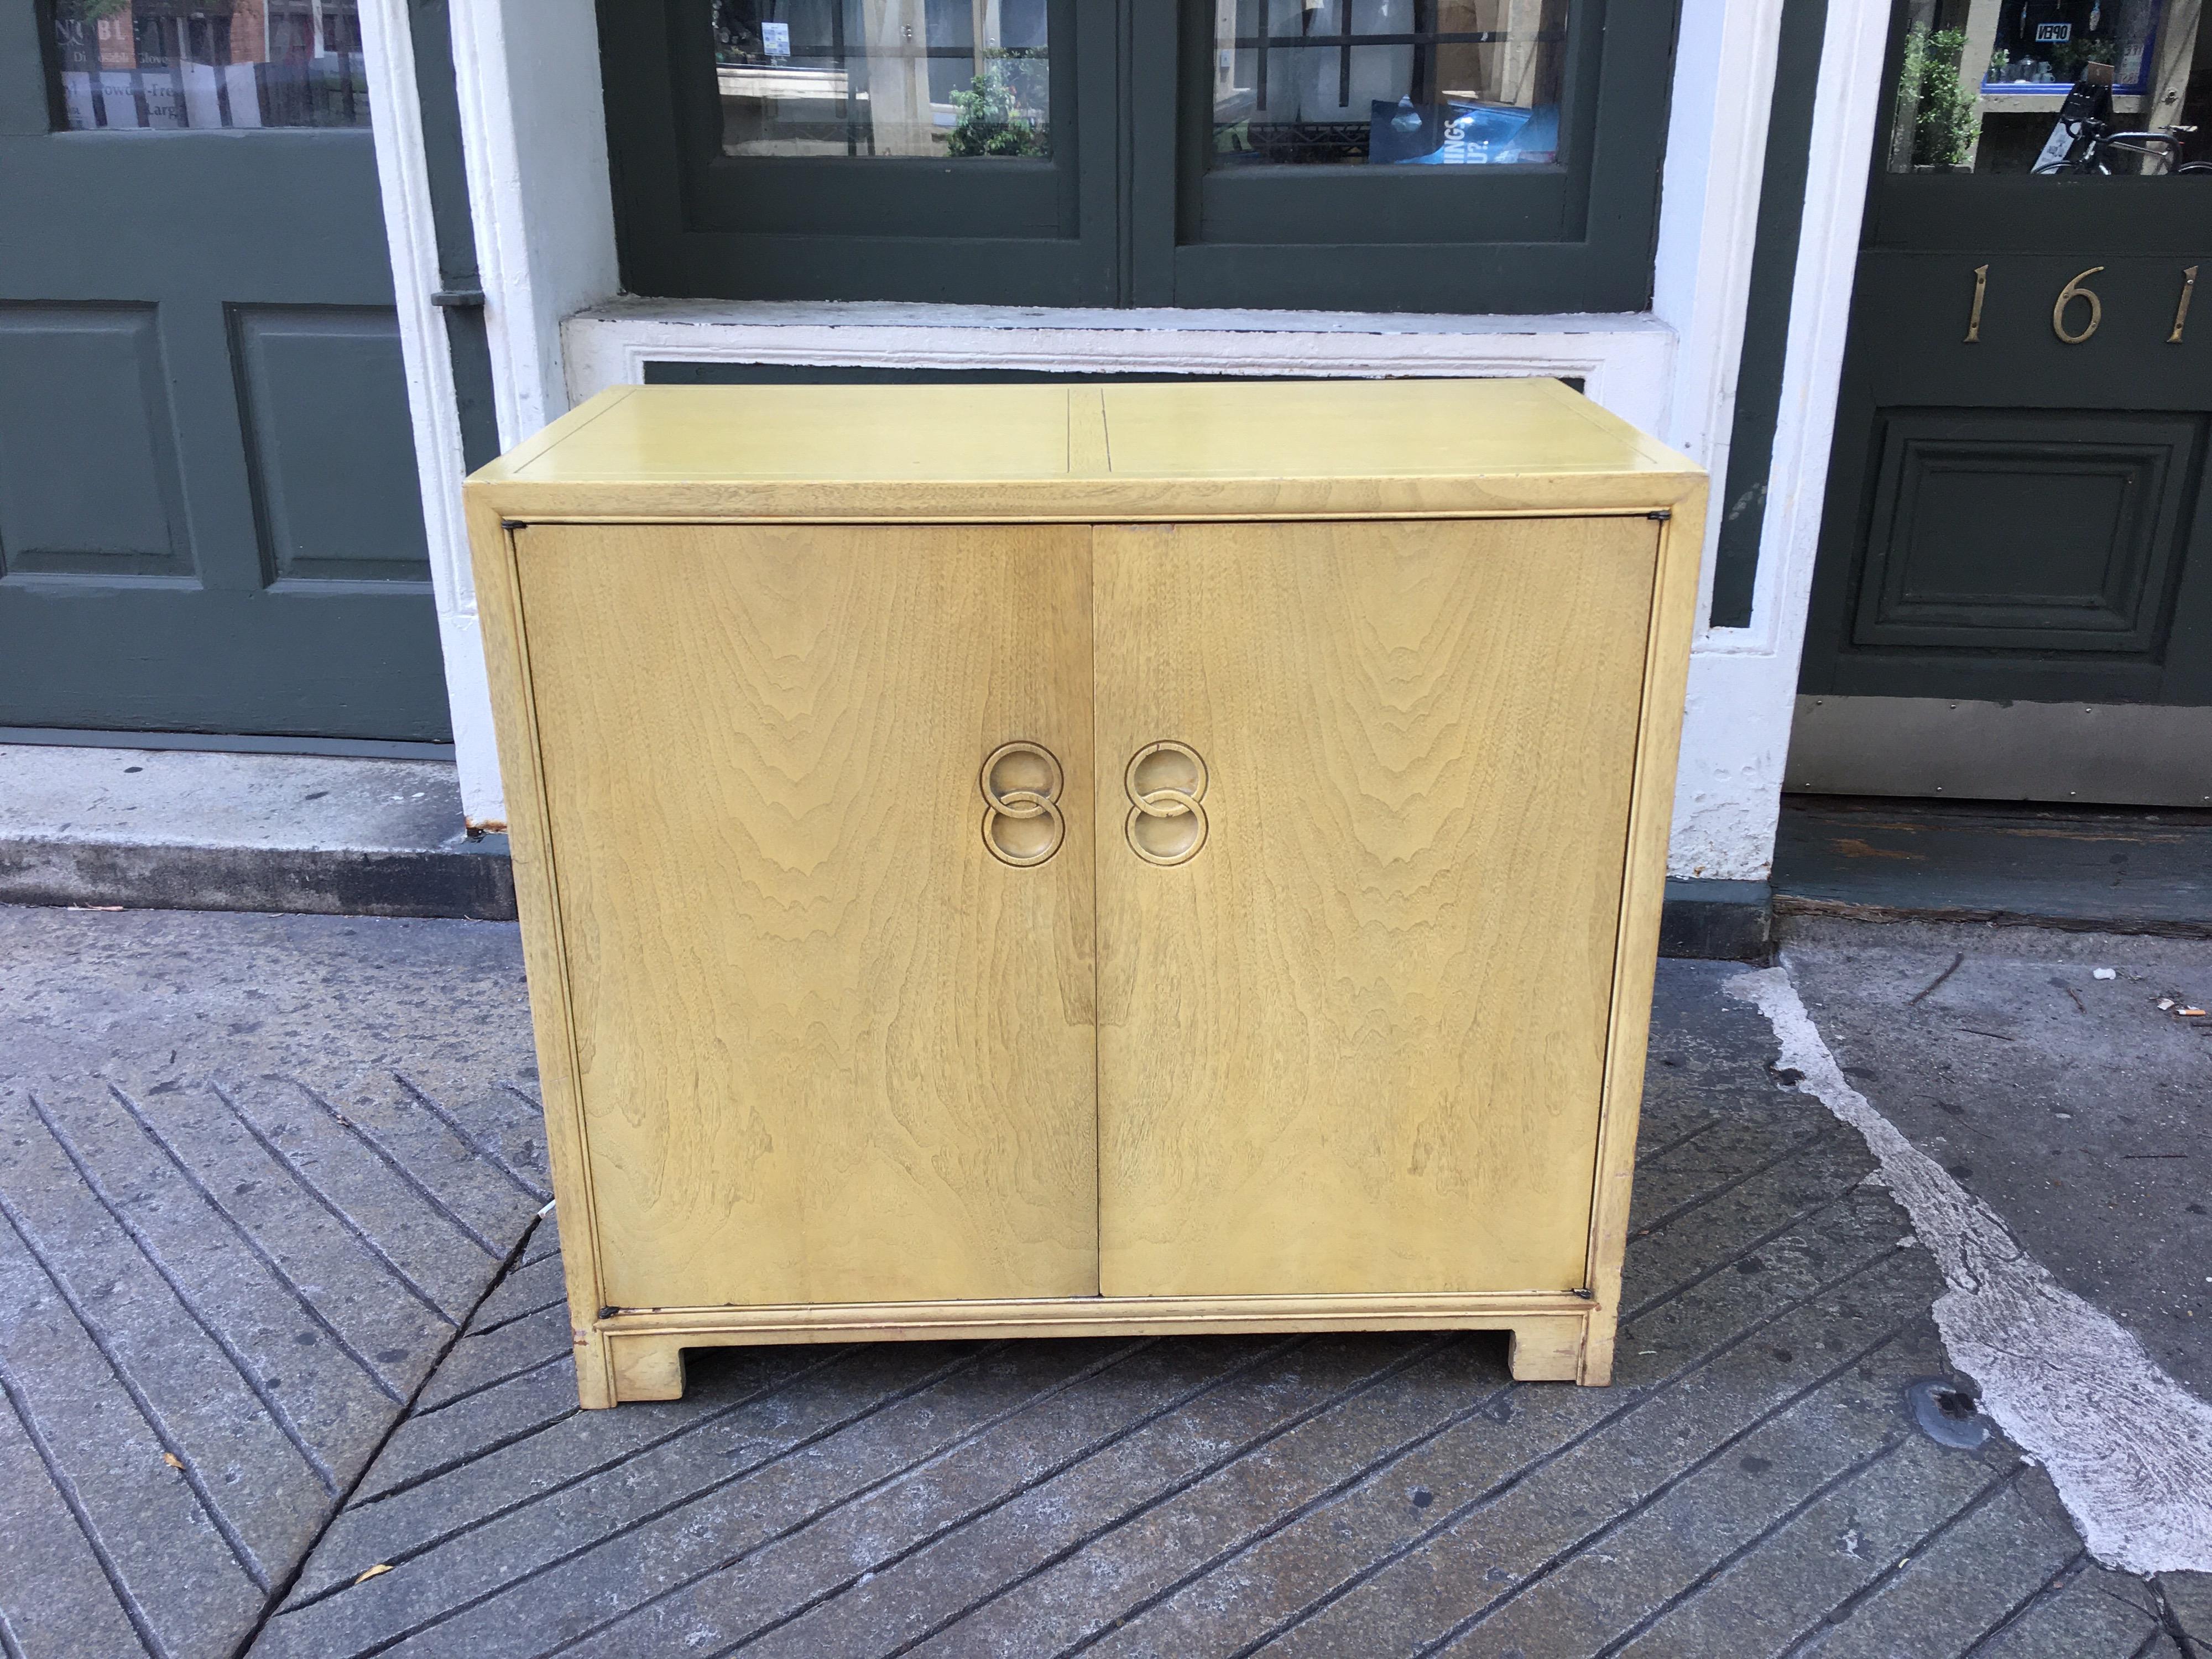 Michael Taylor for Baker Furniture cabinet in original ivory finish. 2 doors open to reveal 6 pull out drawers. Cabinet is in great solid condition! Ready to use or refinish as you want! Perfect in the bedroom or dining room!